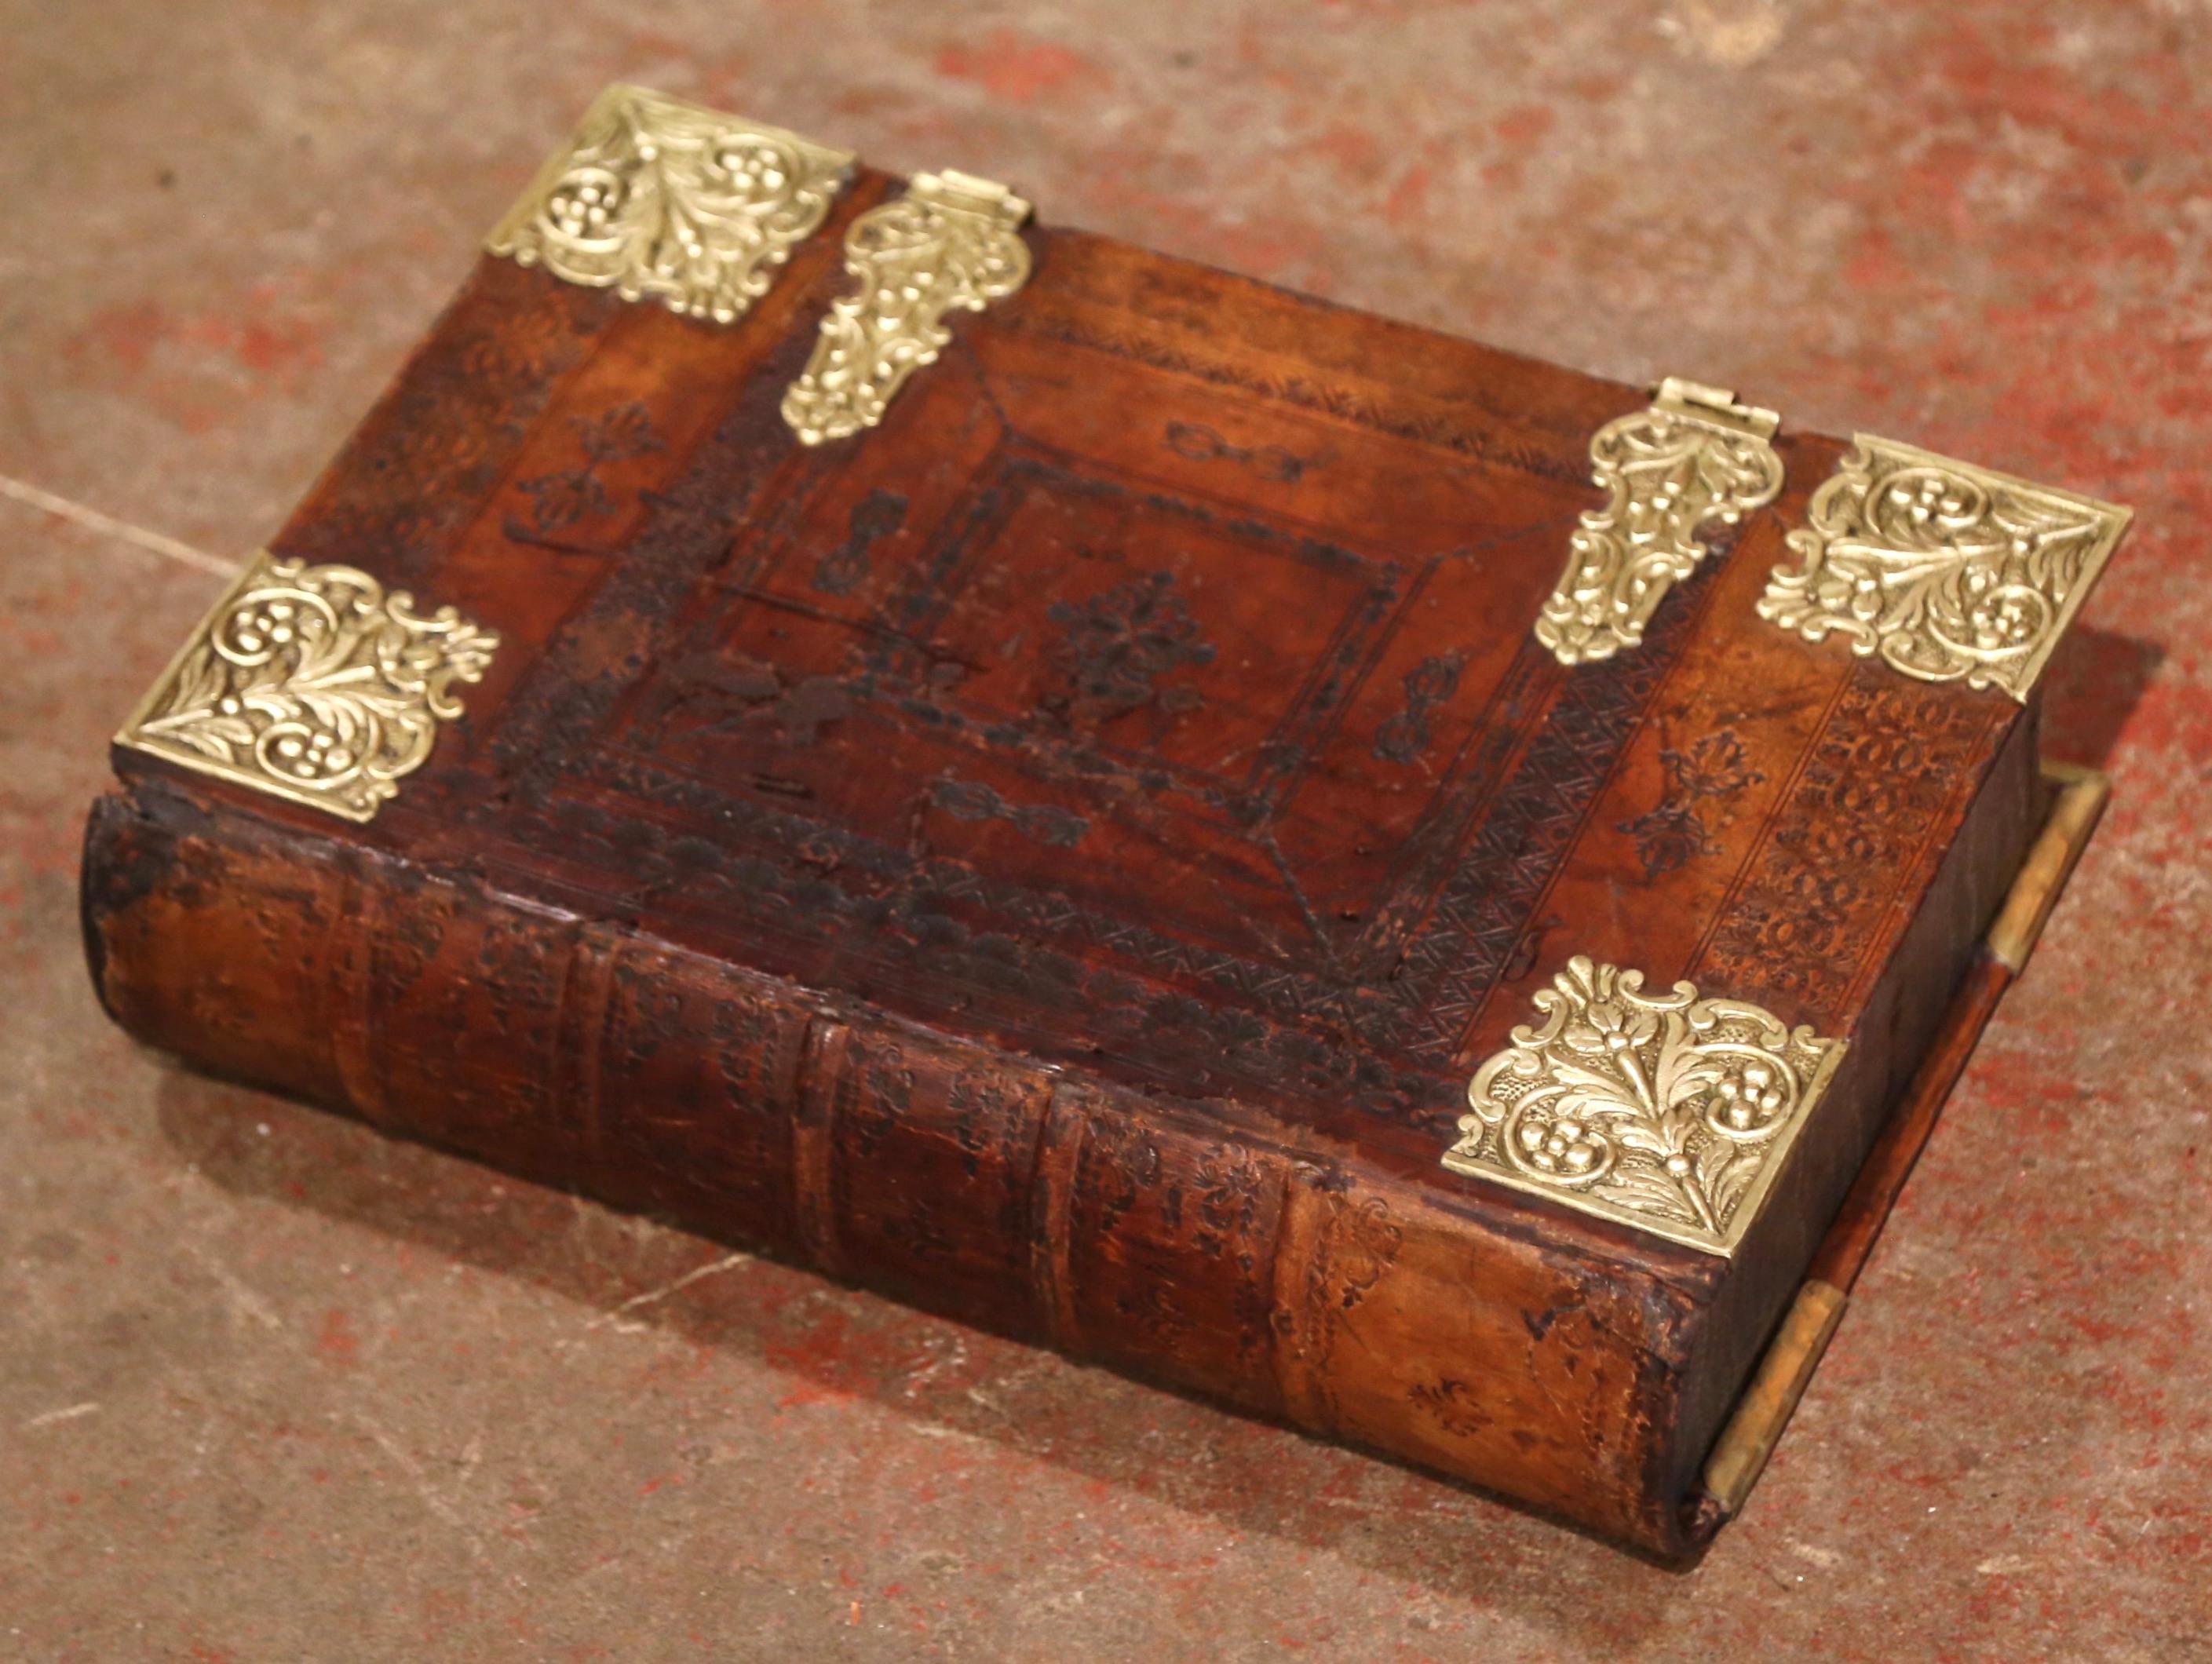 Store your TV remote controls or other valuables in this antique “Trompe l’œil” box. Created in Germany circa 1880, the embossed leather book binding, now fashioned as a table box is fitted with gilt brass clasps and corner mounts. It has marbleized